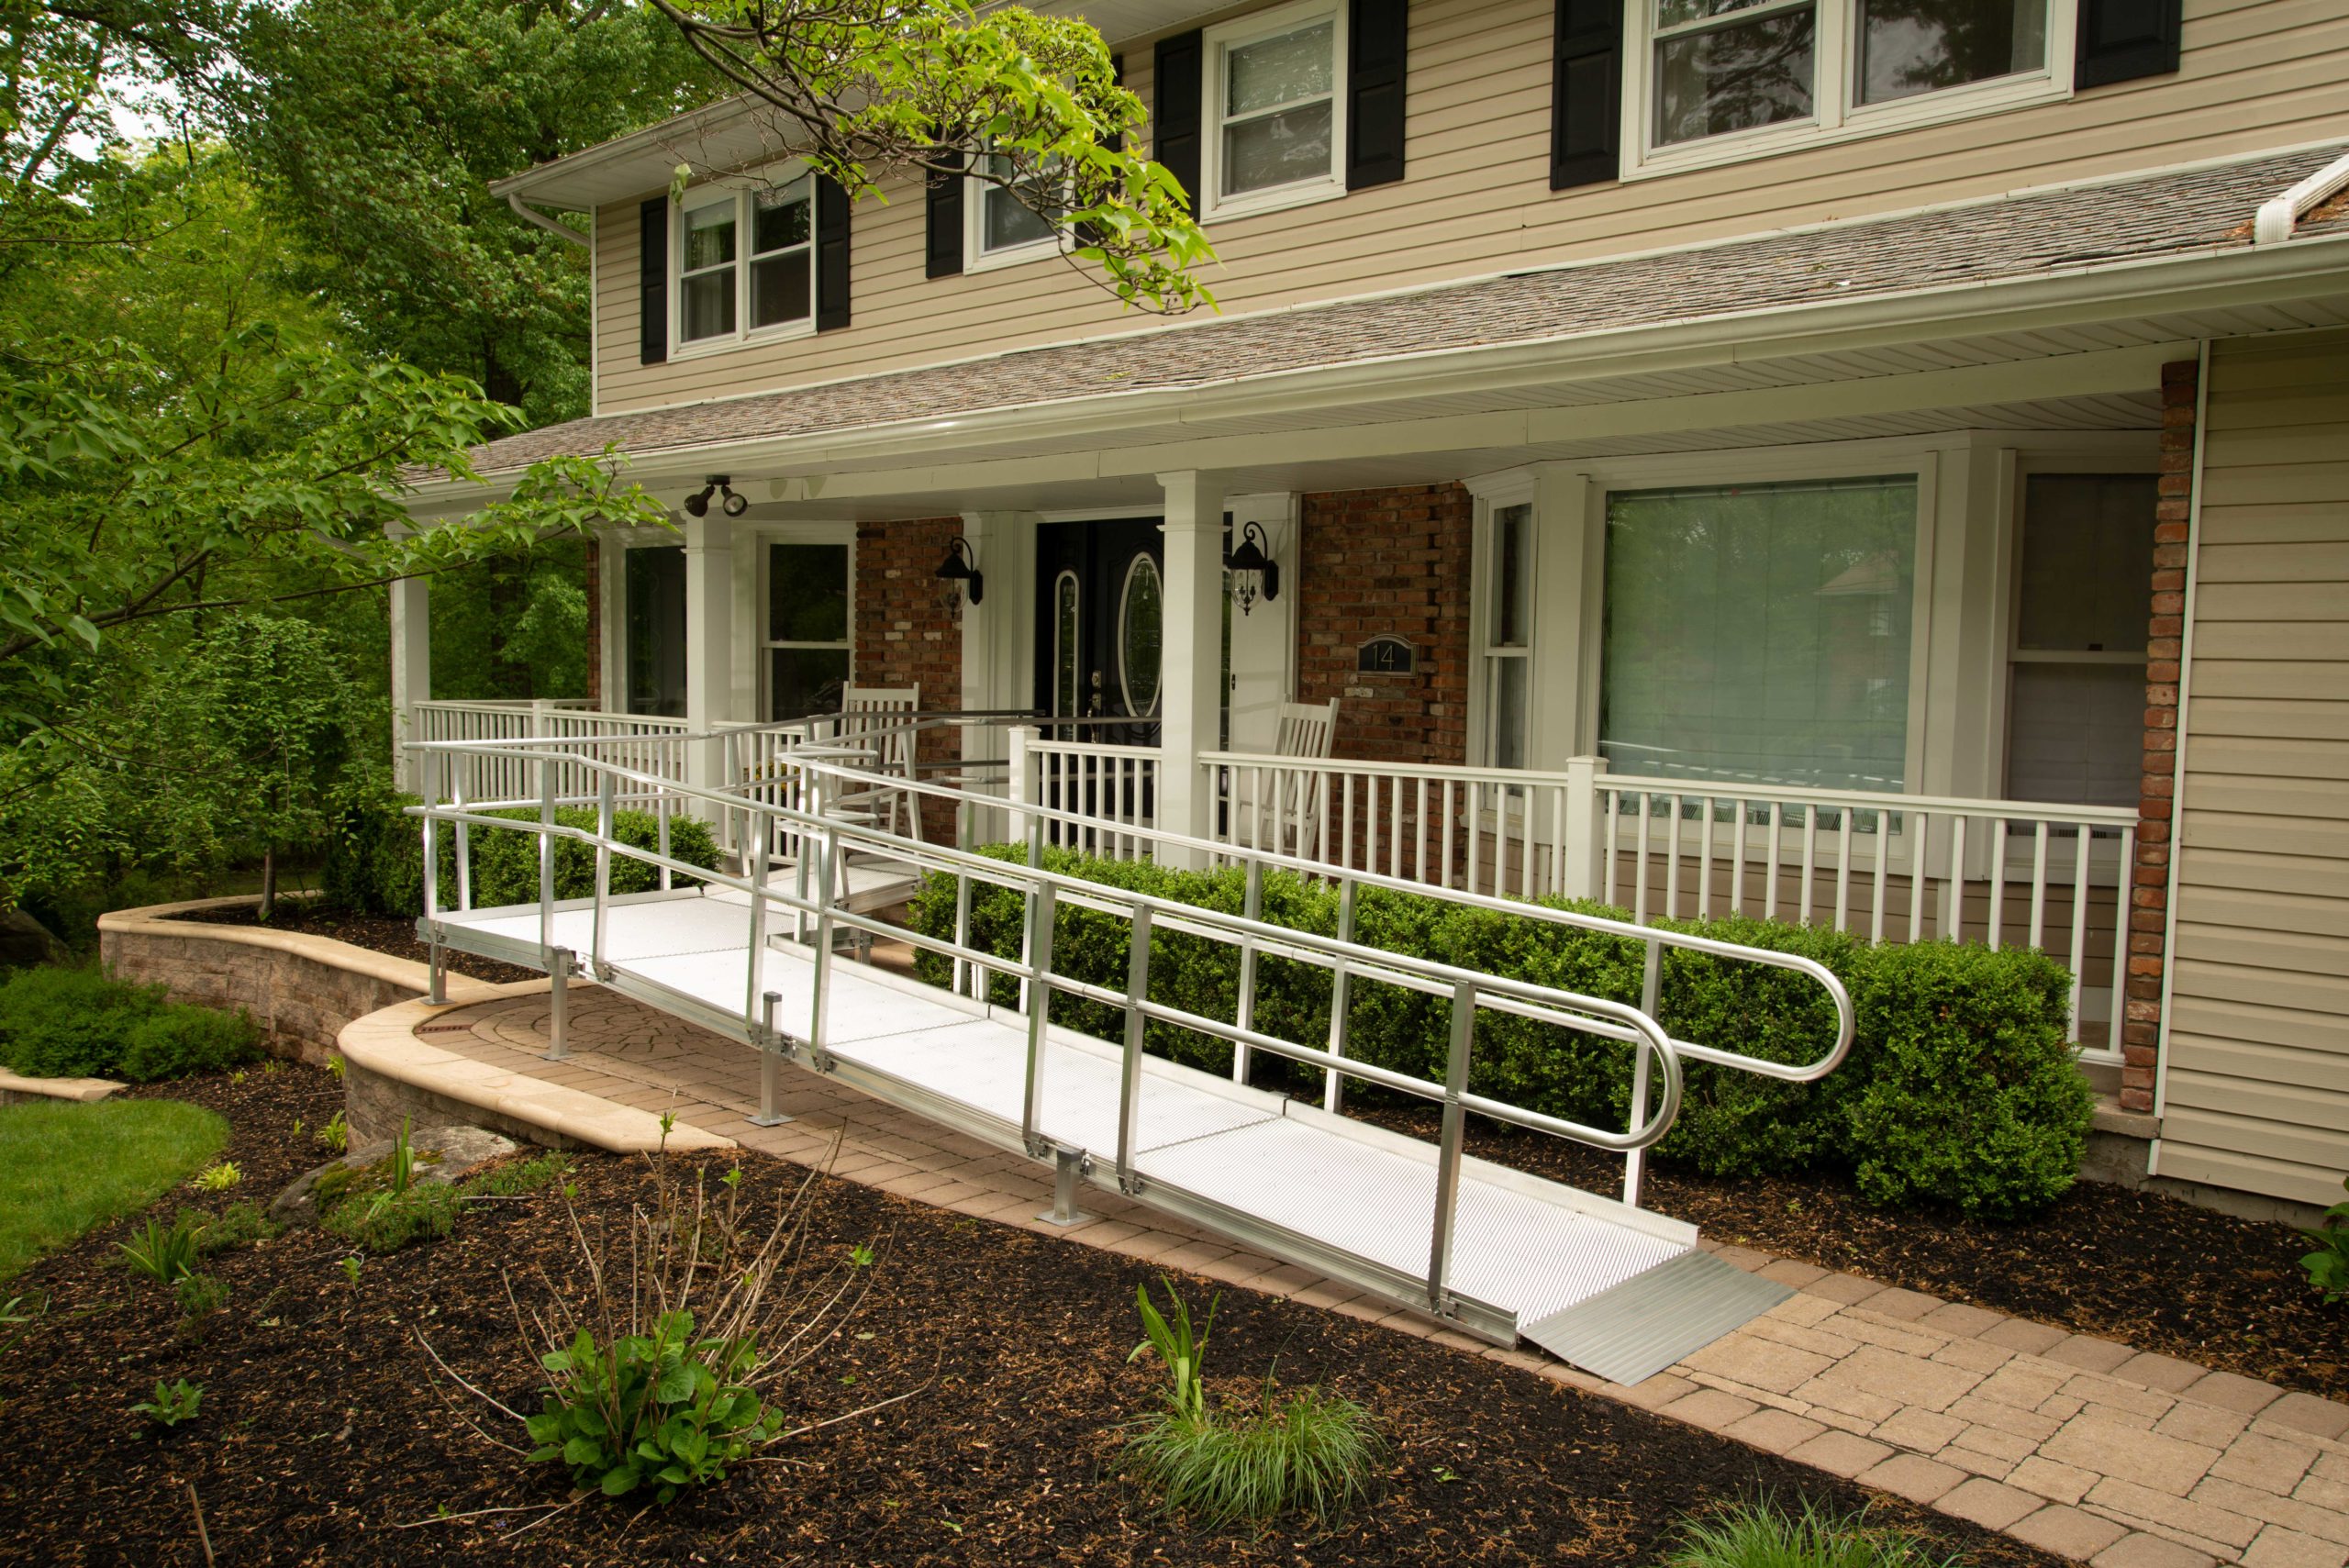 A wrap-around metal ramp for wheelchair accessibility.